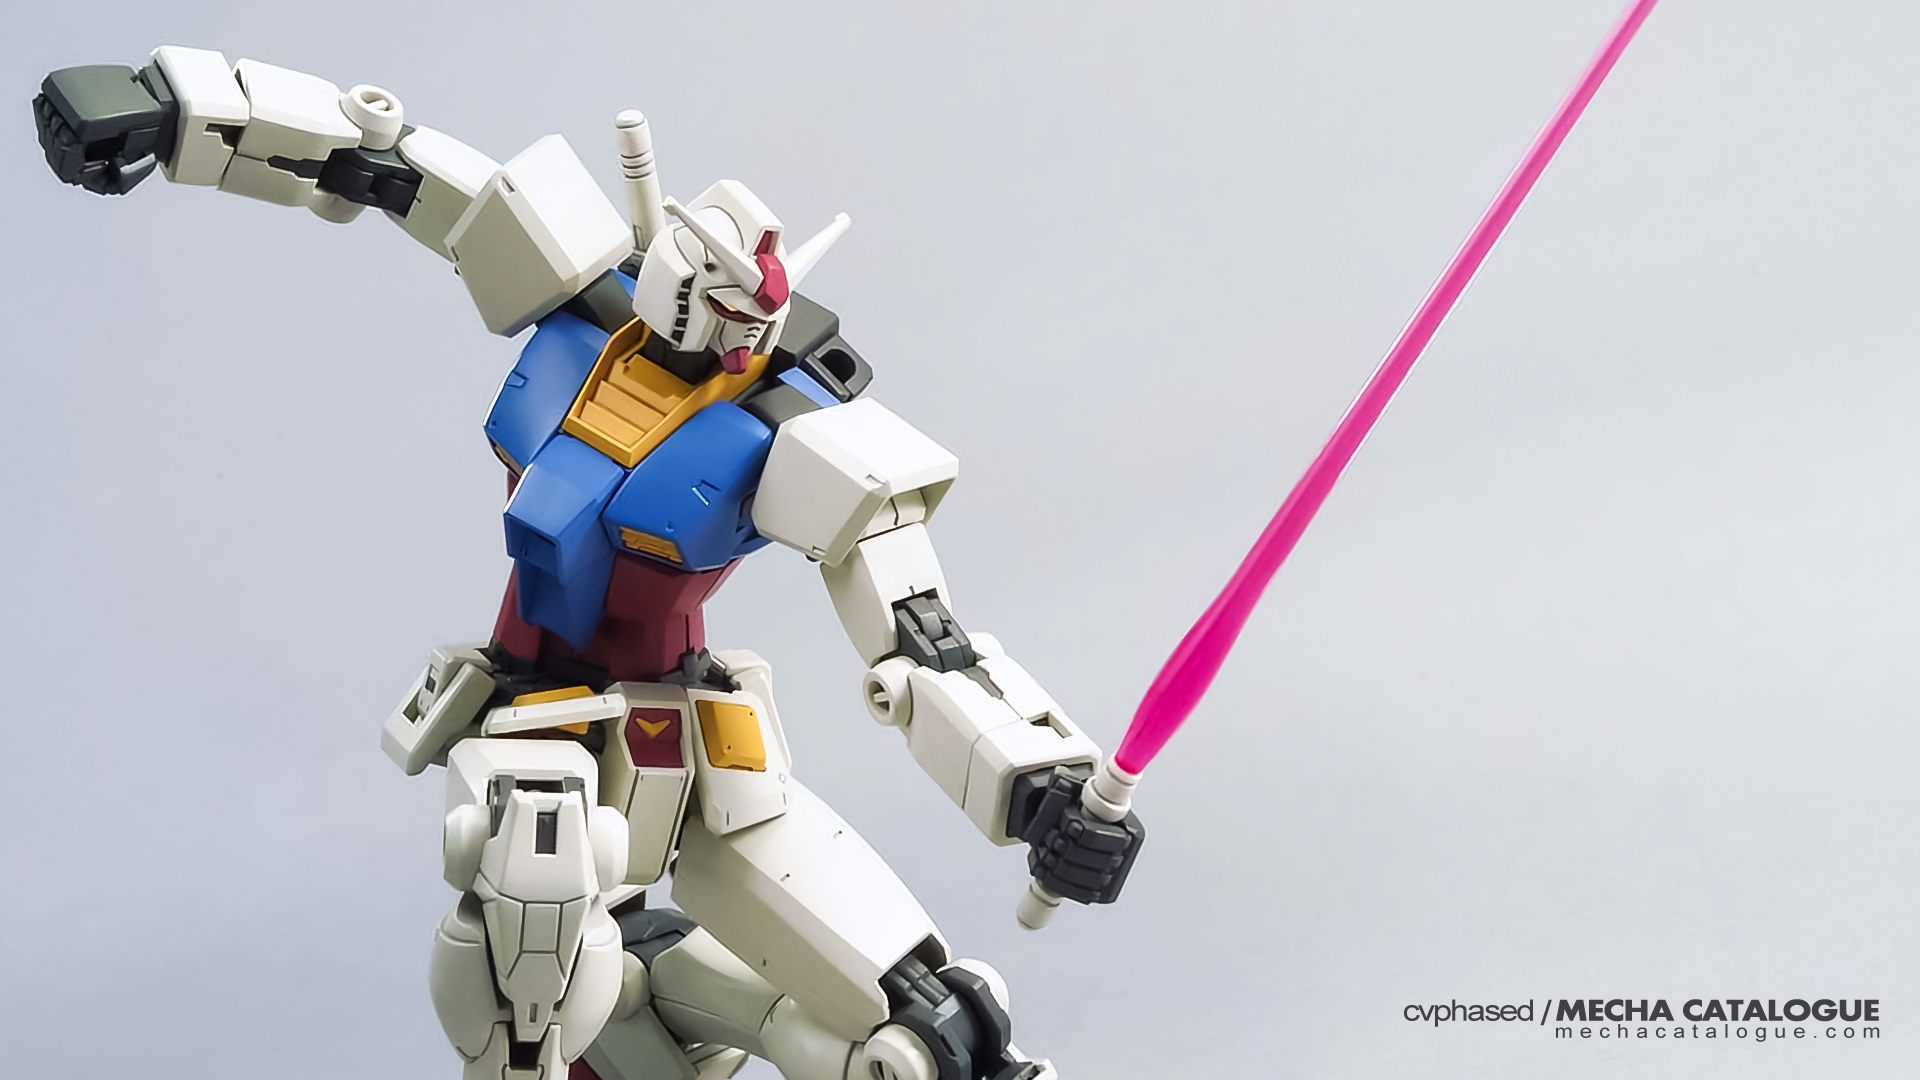 HG RX-78-2 Gundam [Beyond Global]: Full Reveal and Details